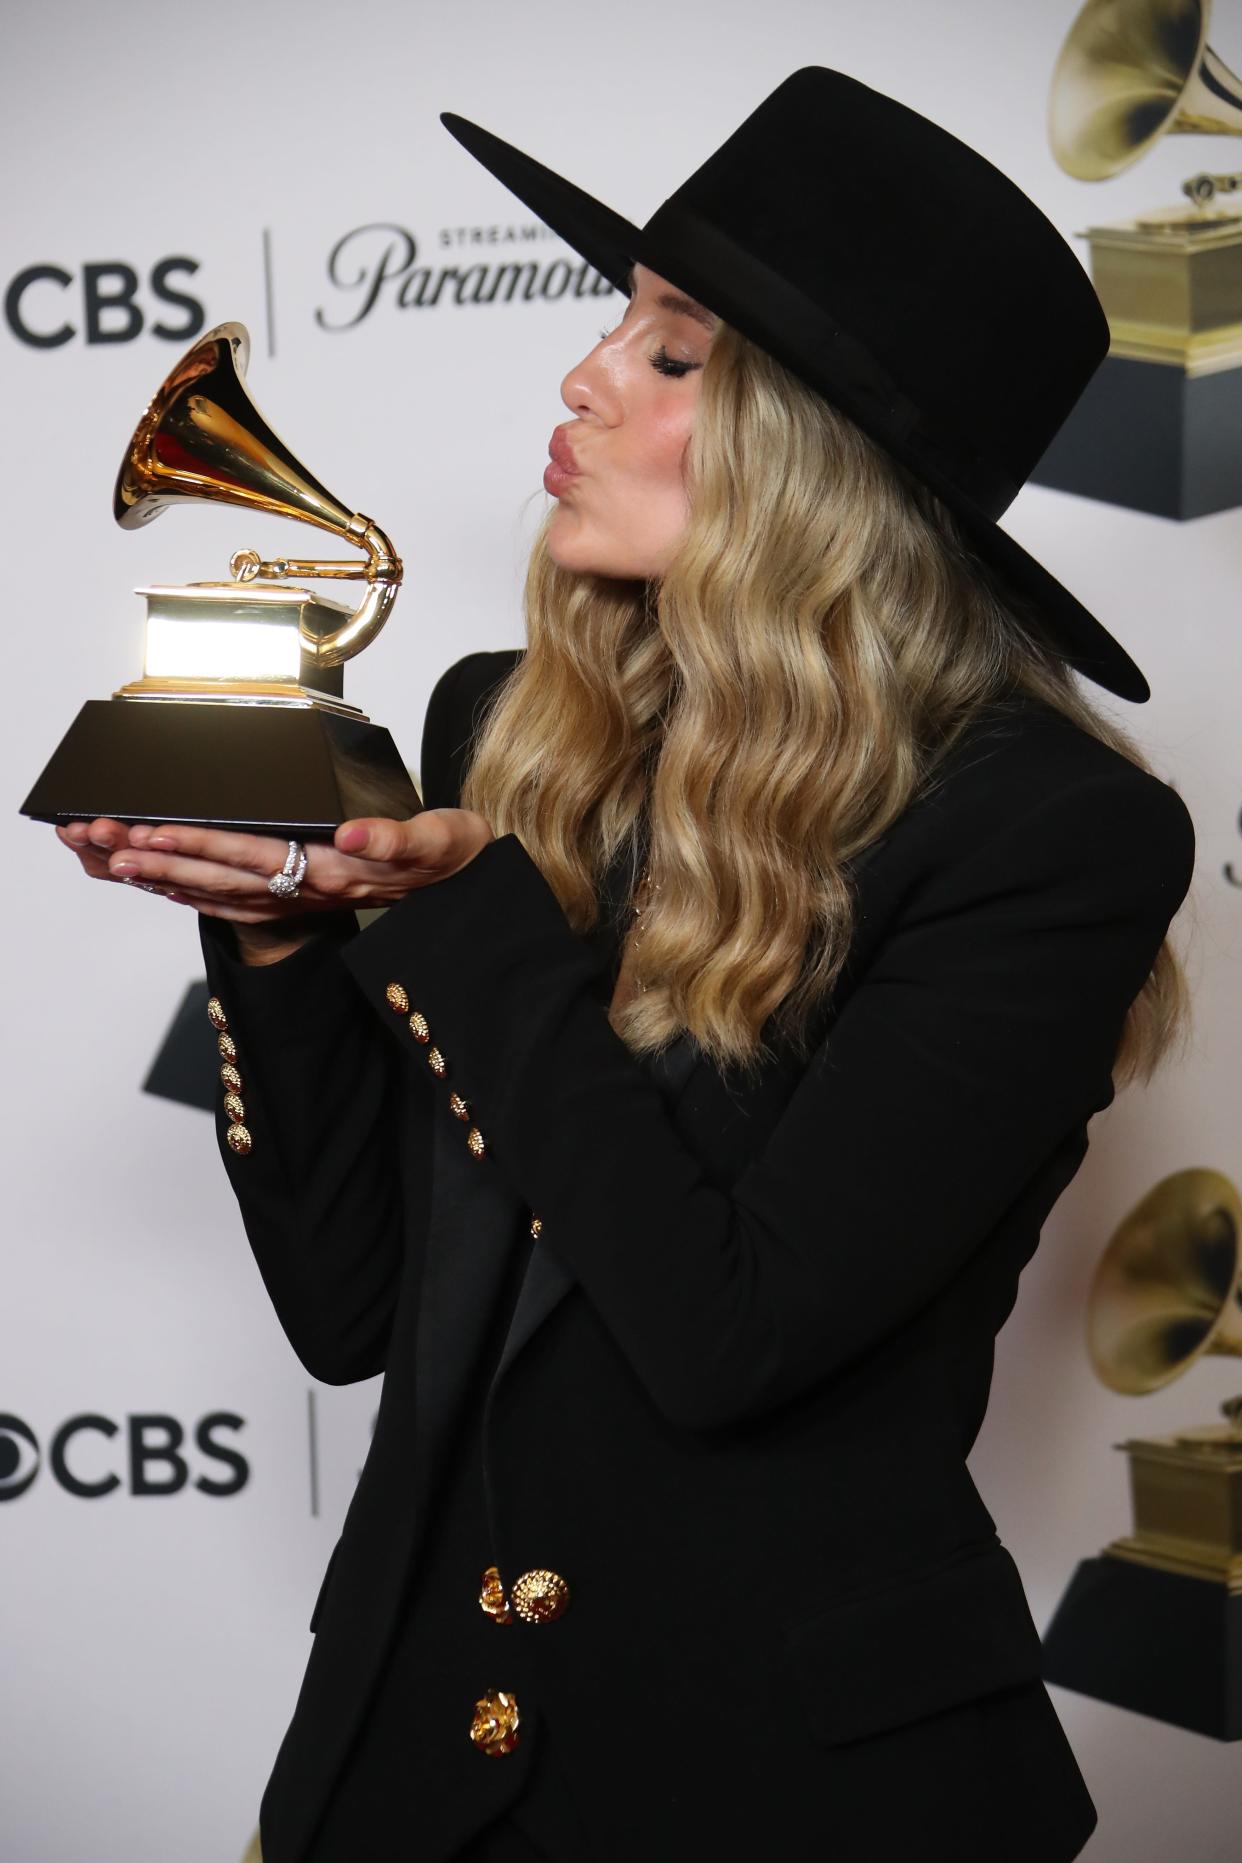 Lainey Wilson, winner of Best Country Album for ‘Bell Bottom Country’ at the 66th Annual Grammy Awards.